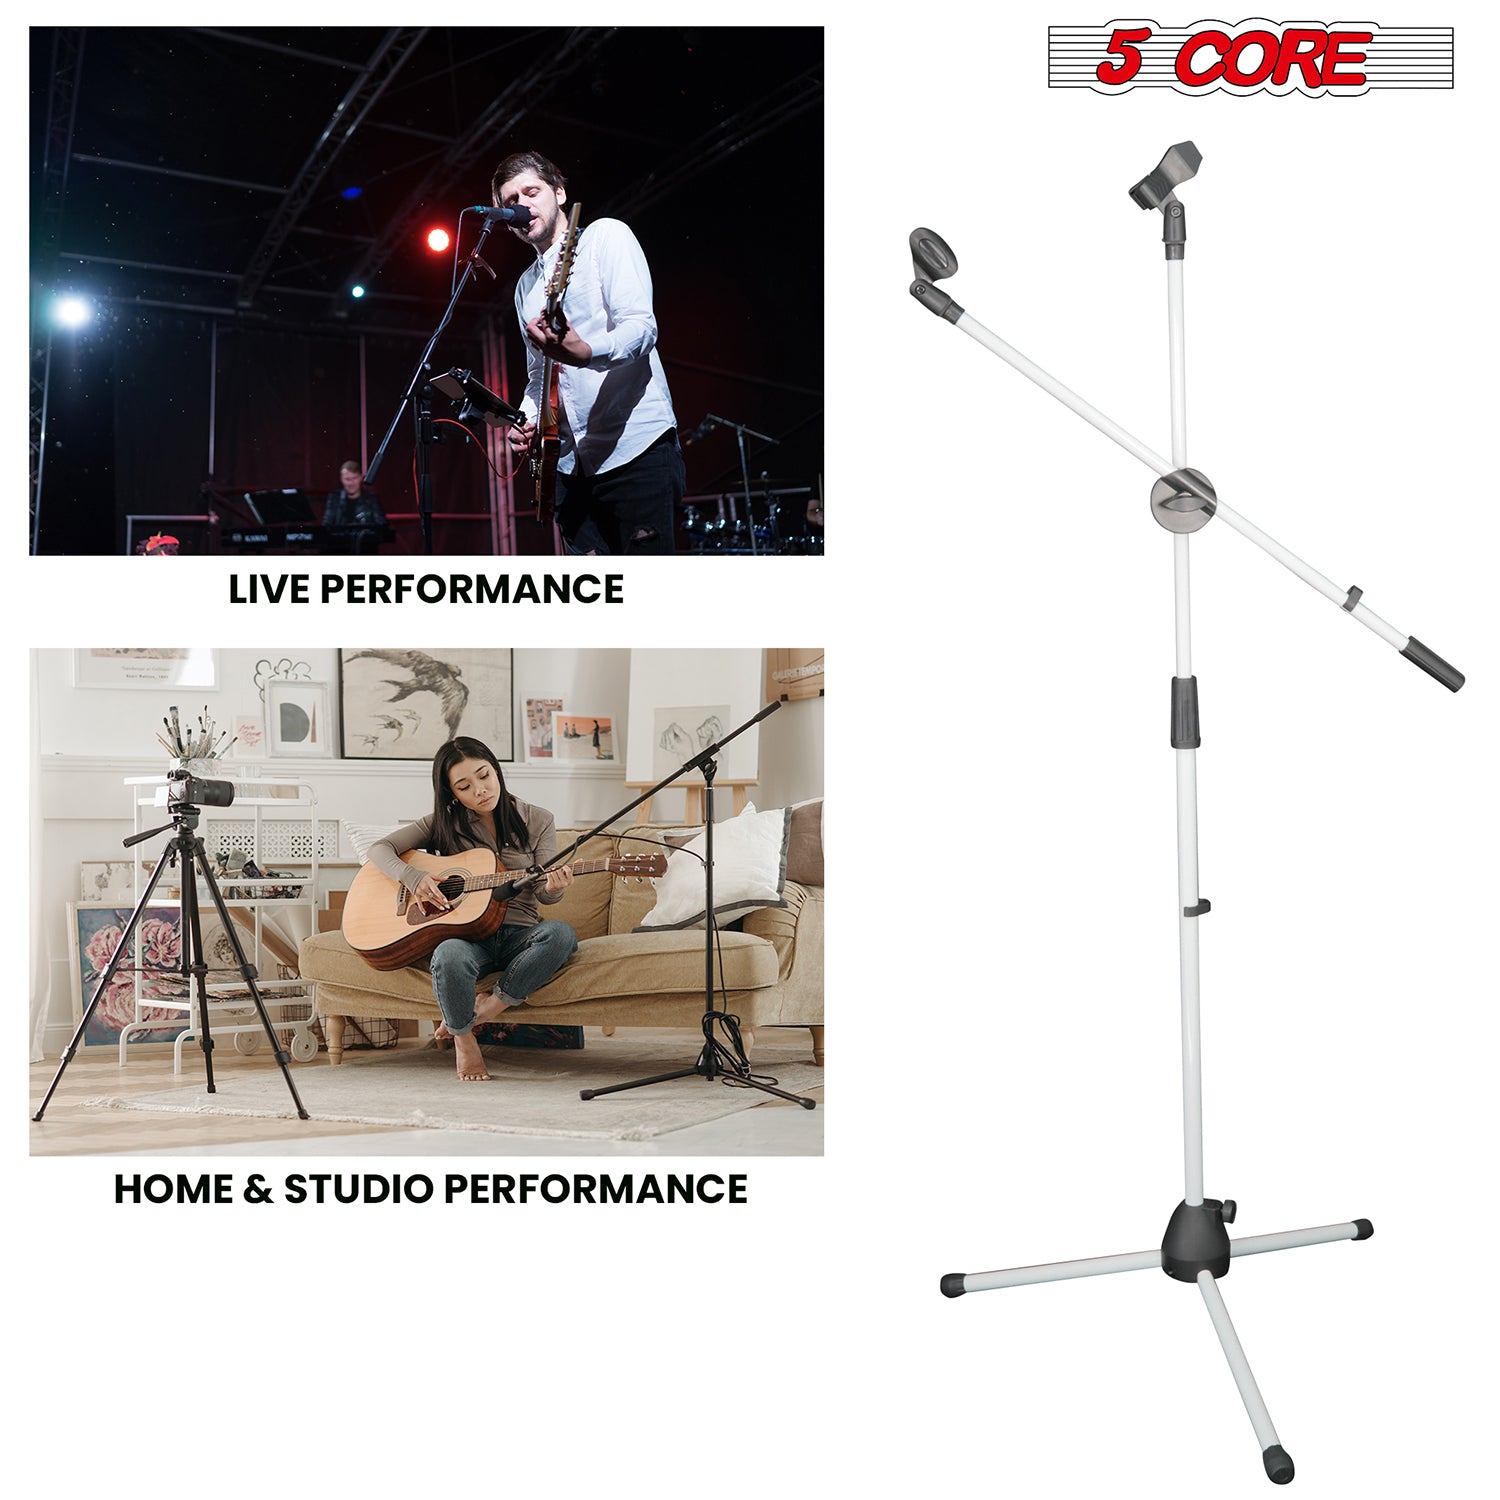 5 Core Mic Stand Collapsible Height Adjustable 31 to 59” Dual Metal Microphone Tripod Stand w Boom Arm Stand Para Microfono for Singing, Karaoke, Stage and Outdoor Activities 2Pc White - MS DBL G WH 2pcs